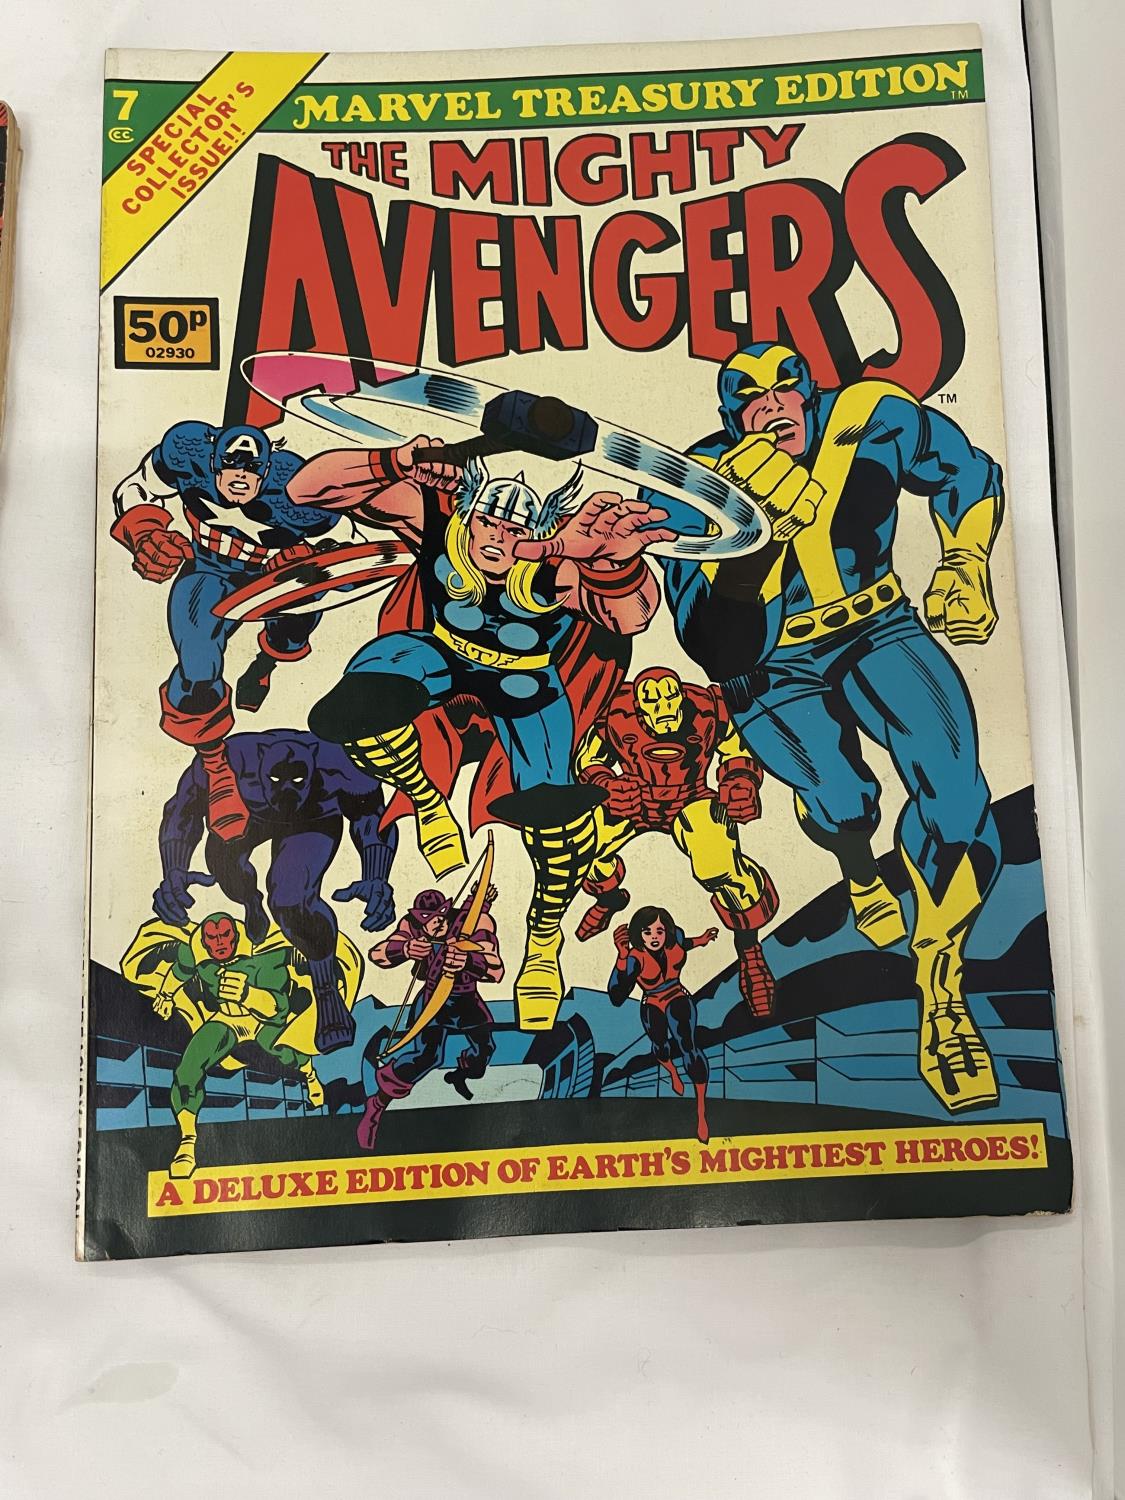 TWO MARVEL COMICS TREASURY EDITION COMICS, 1975, 'THE HULK ON THE RAMPAGE' AND 'THE MIGHTY AVENGERS' - Image 3 of 3